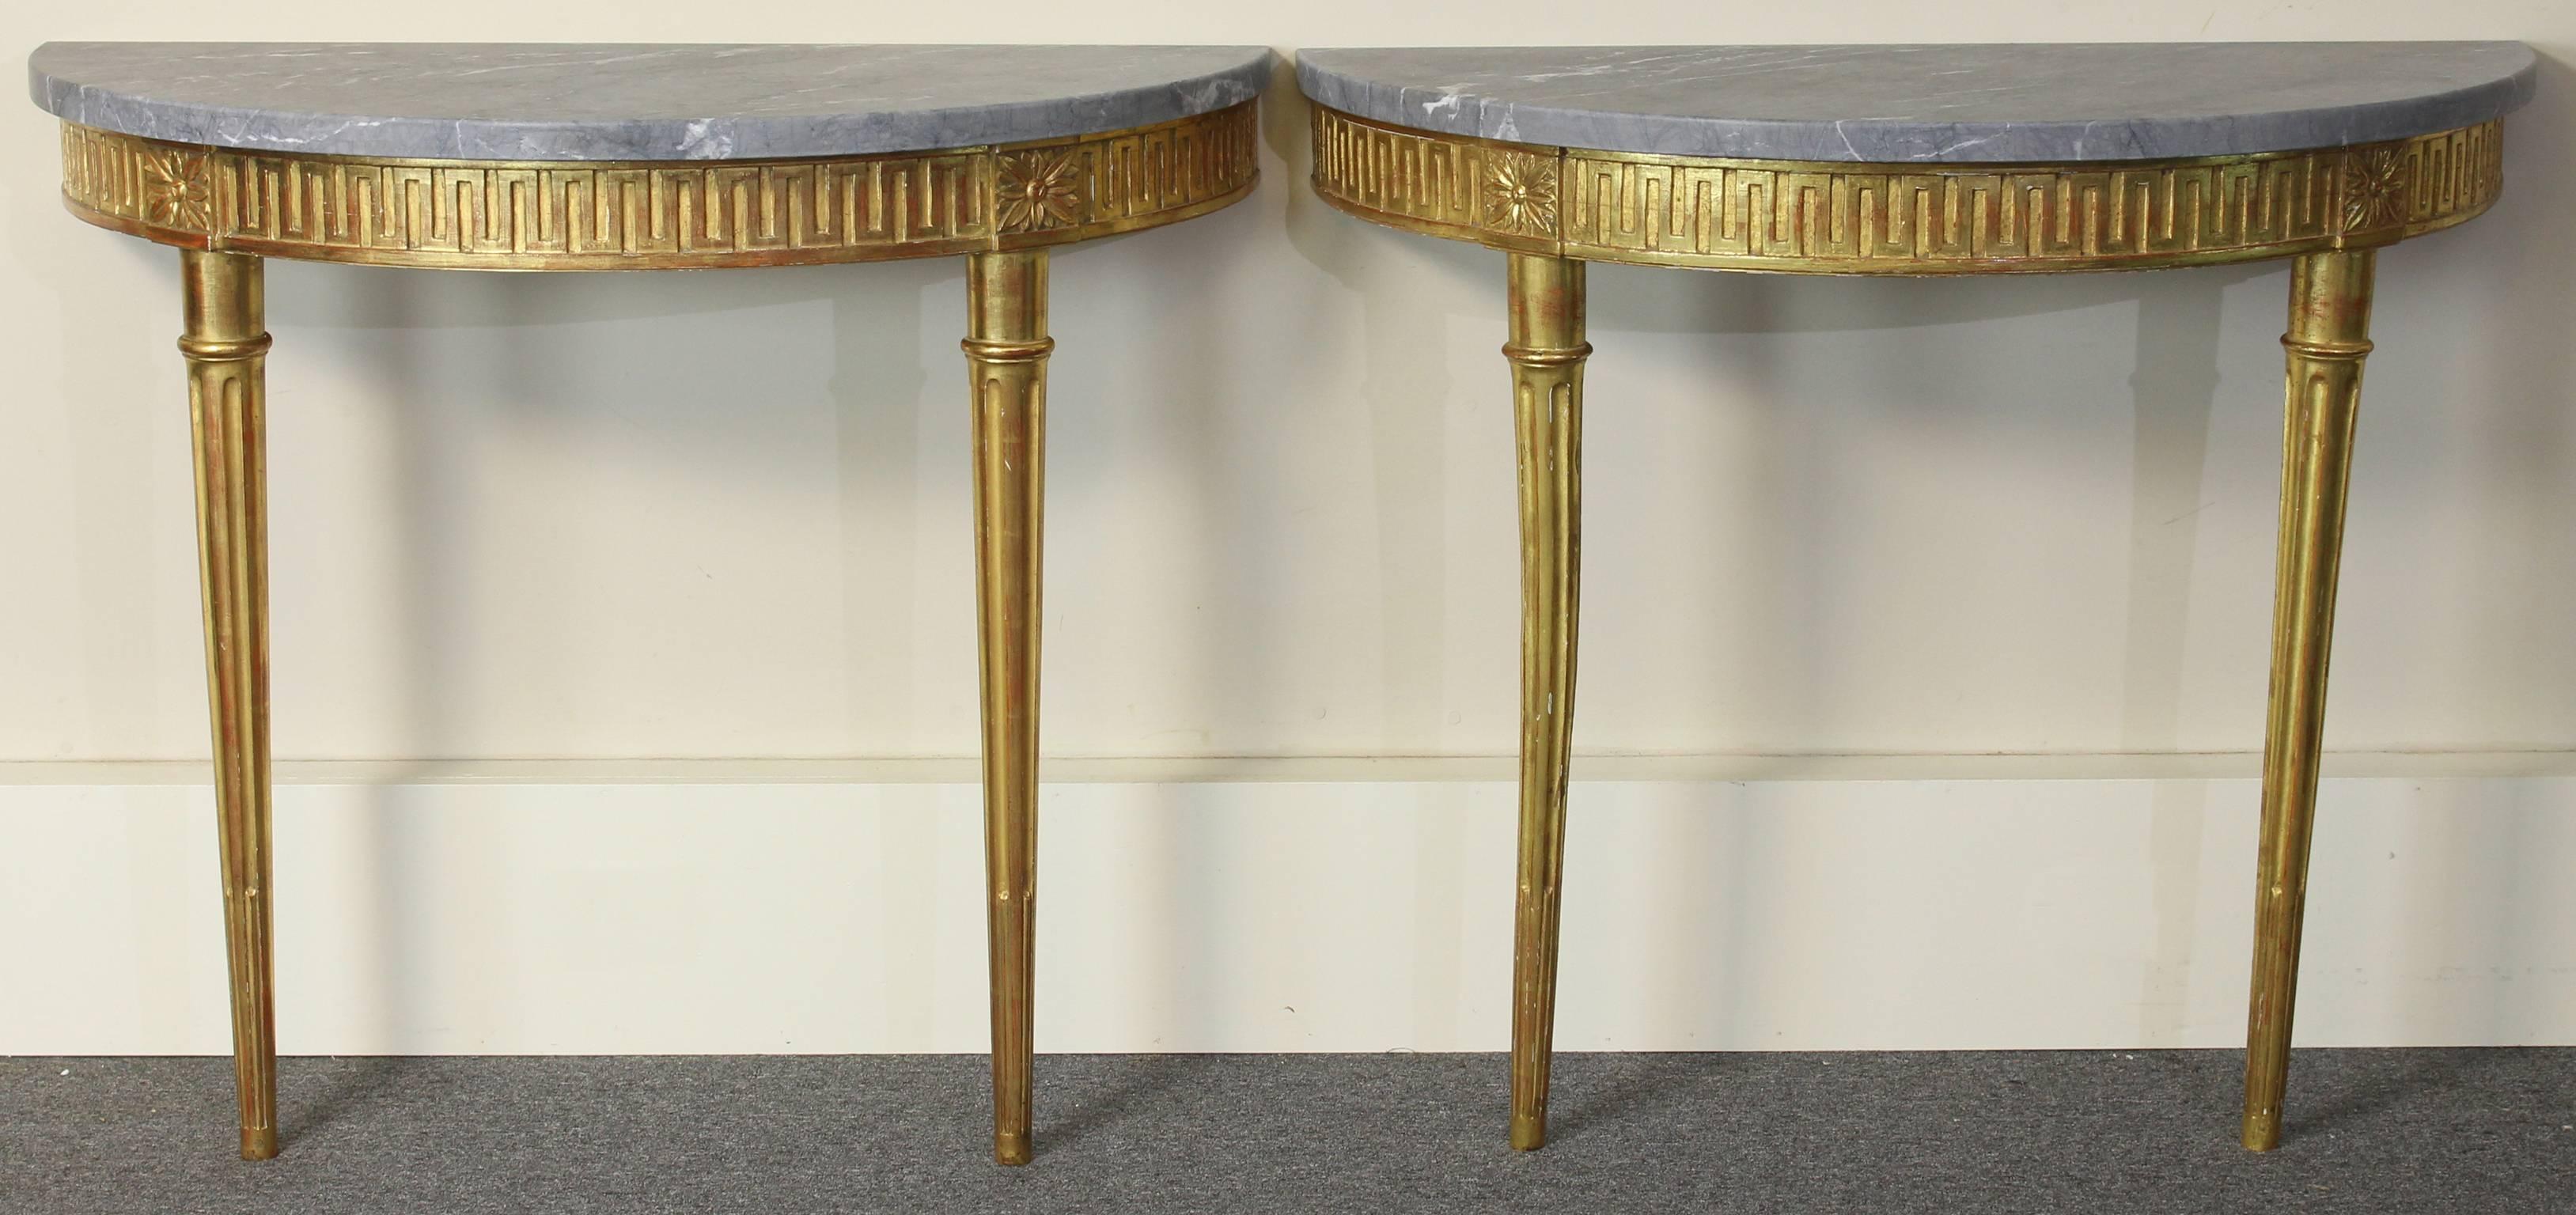 A magnificent pair of French Directoire carved and water gilt decorated wall-mounted demilune console tables with elegant Greek key decoration on the apron and large fluted column tapering legs.